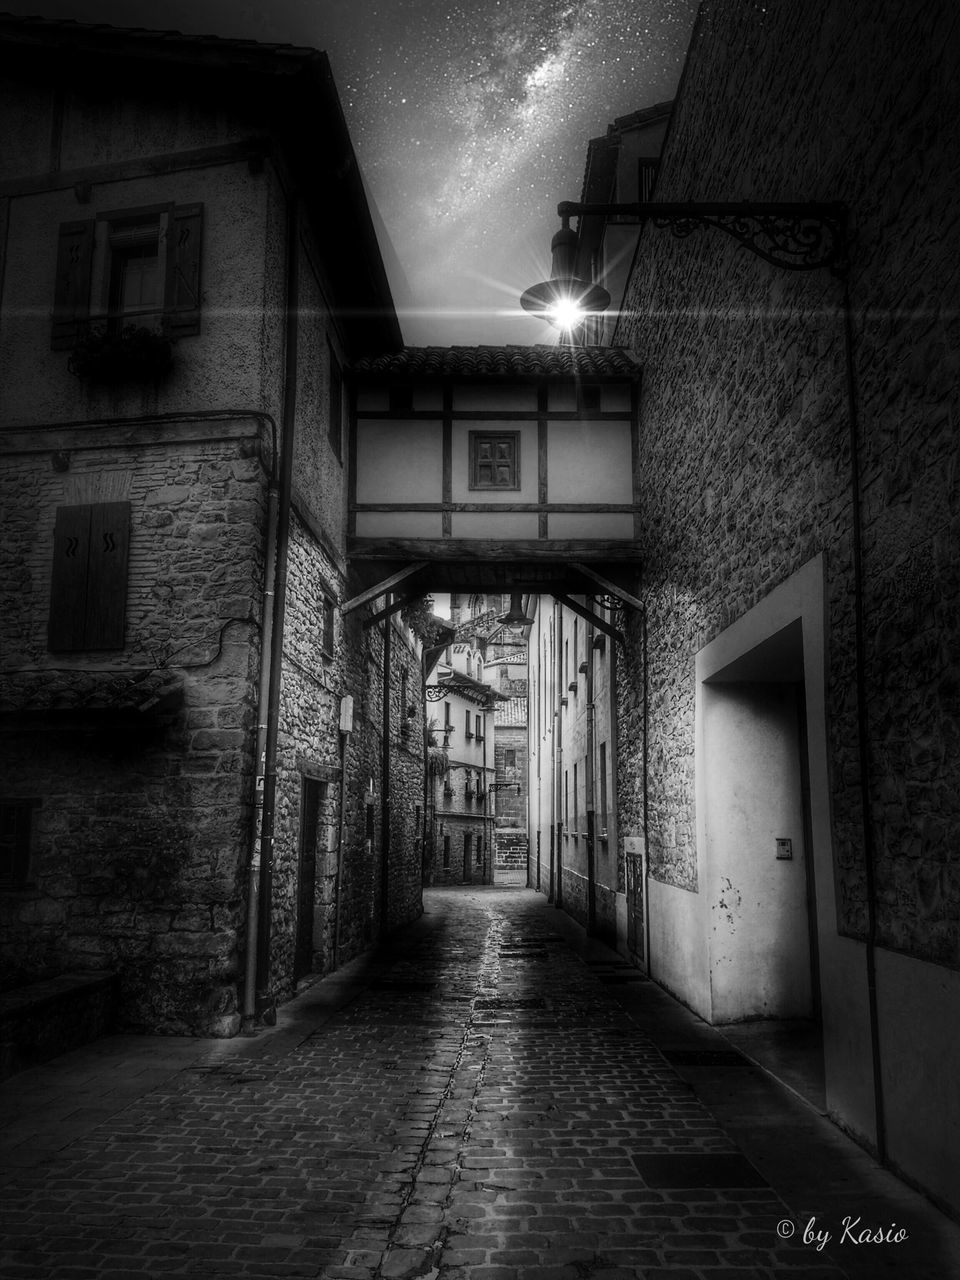 architecture, built structure, building exterior, illuminated, the way forward, building, night, residential structure, residential building, house, empty, door, narrow, window, wall - building feature, lighting equipment, street, cobblestone, diminishing perspective, alley